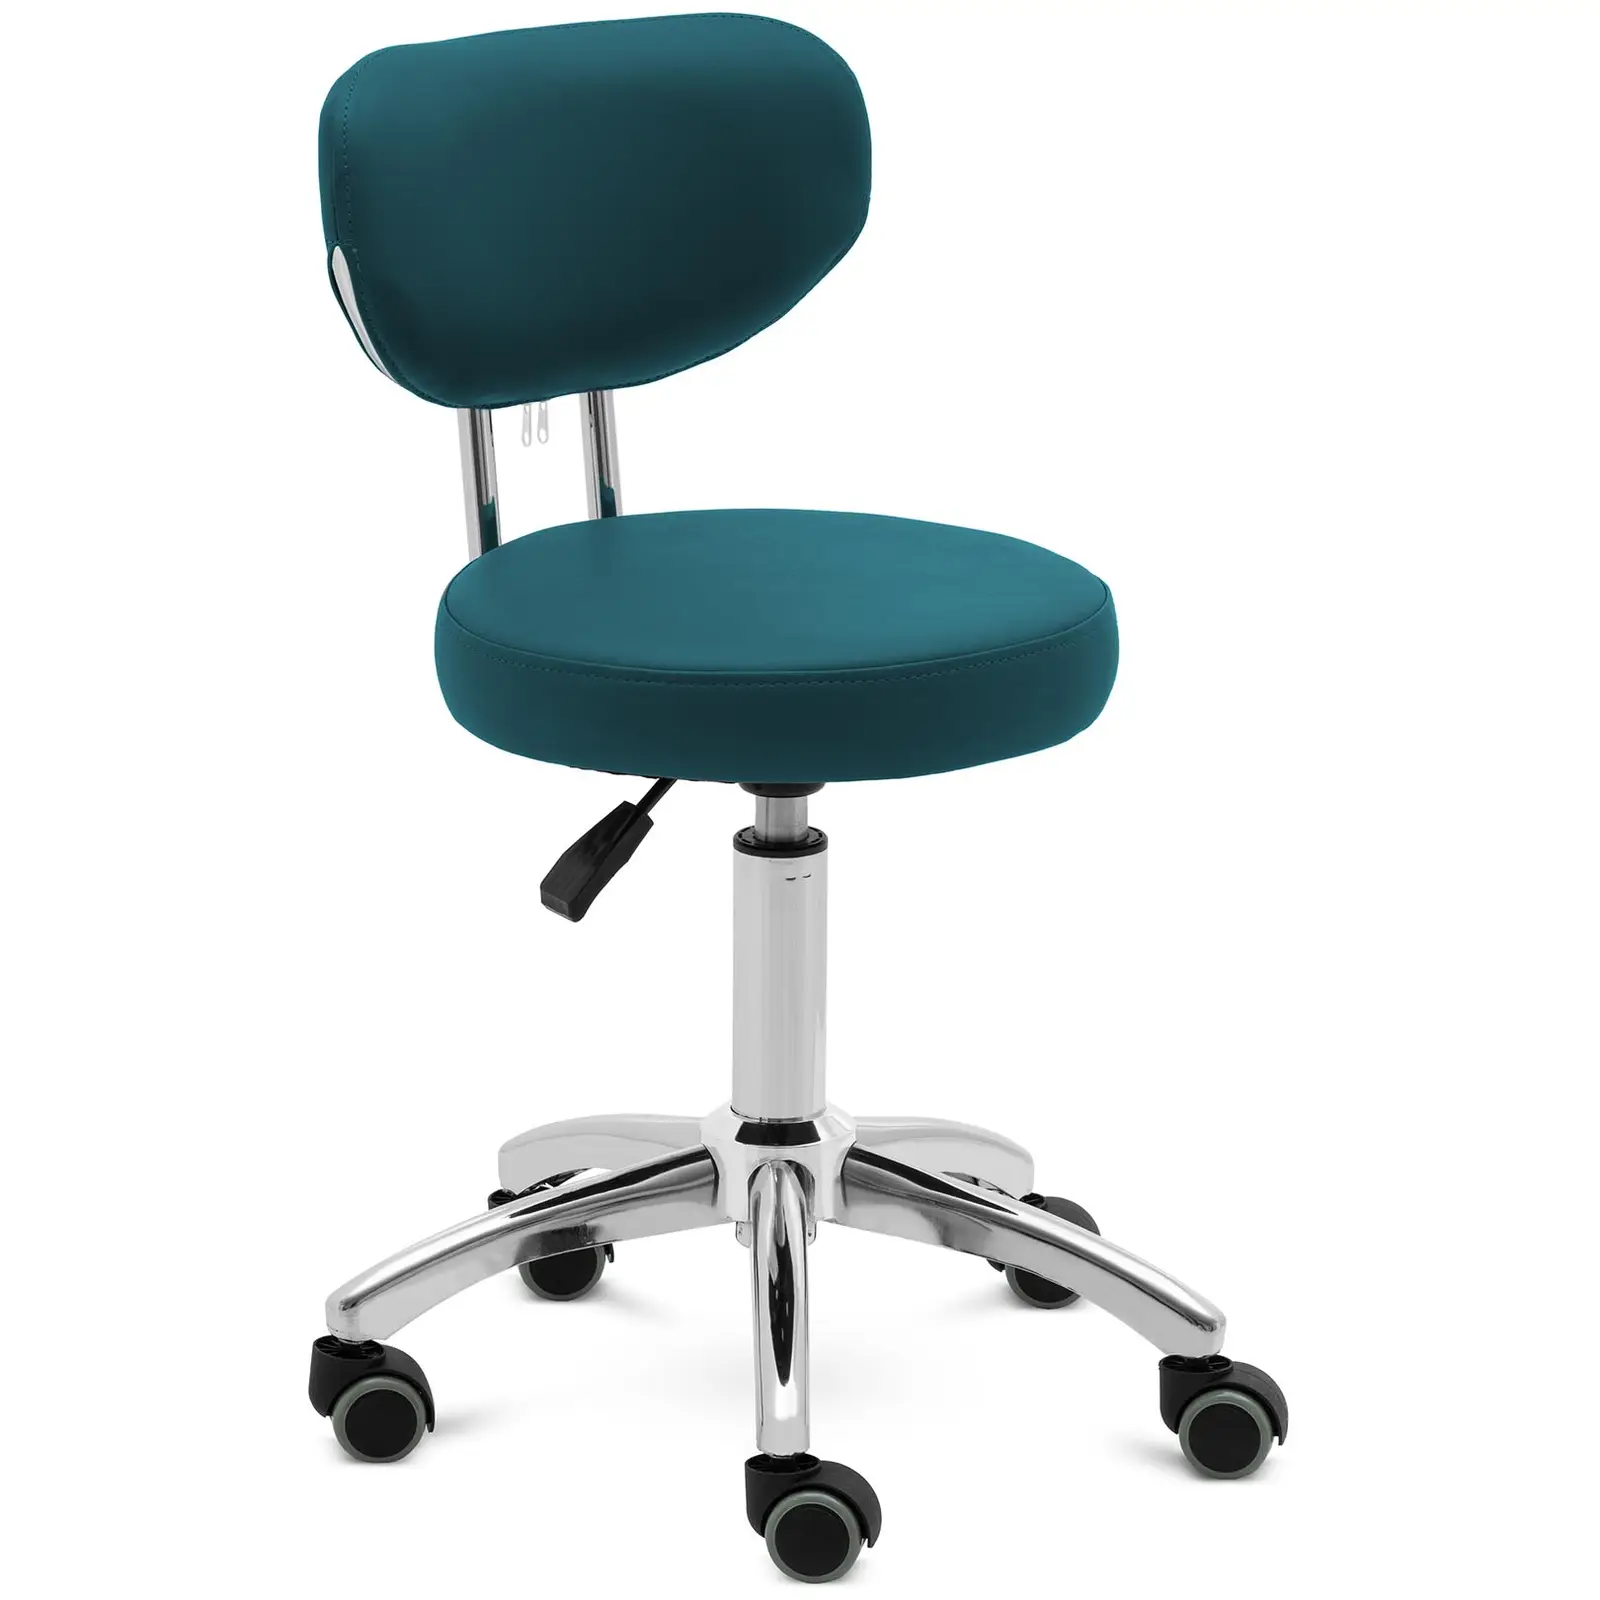 Roller stool with backrest - 46 - 60 cm - 150 kg - turquoise